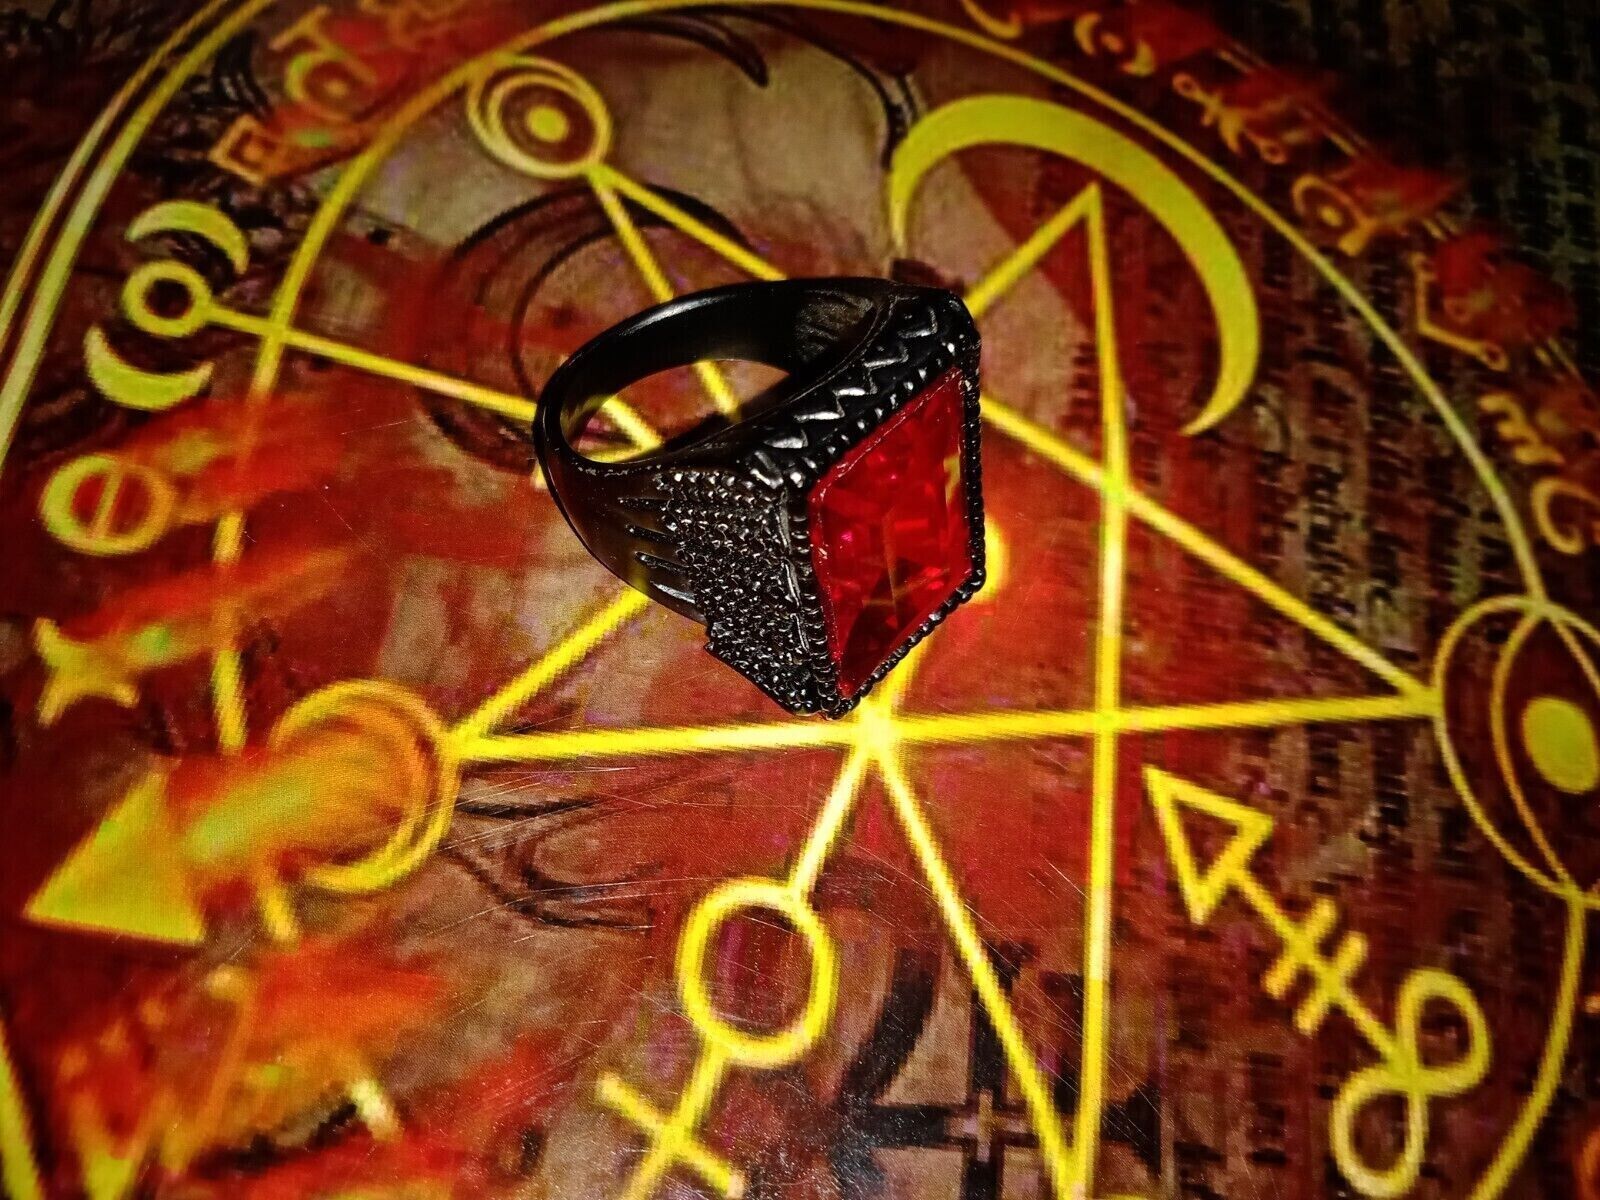 Voodoo Love Ritual Ring Lover Marriage Soul Mate Charisma Sex Partner Blood Ore+